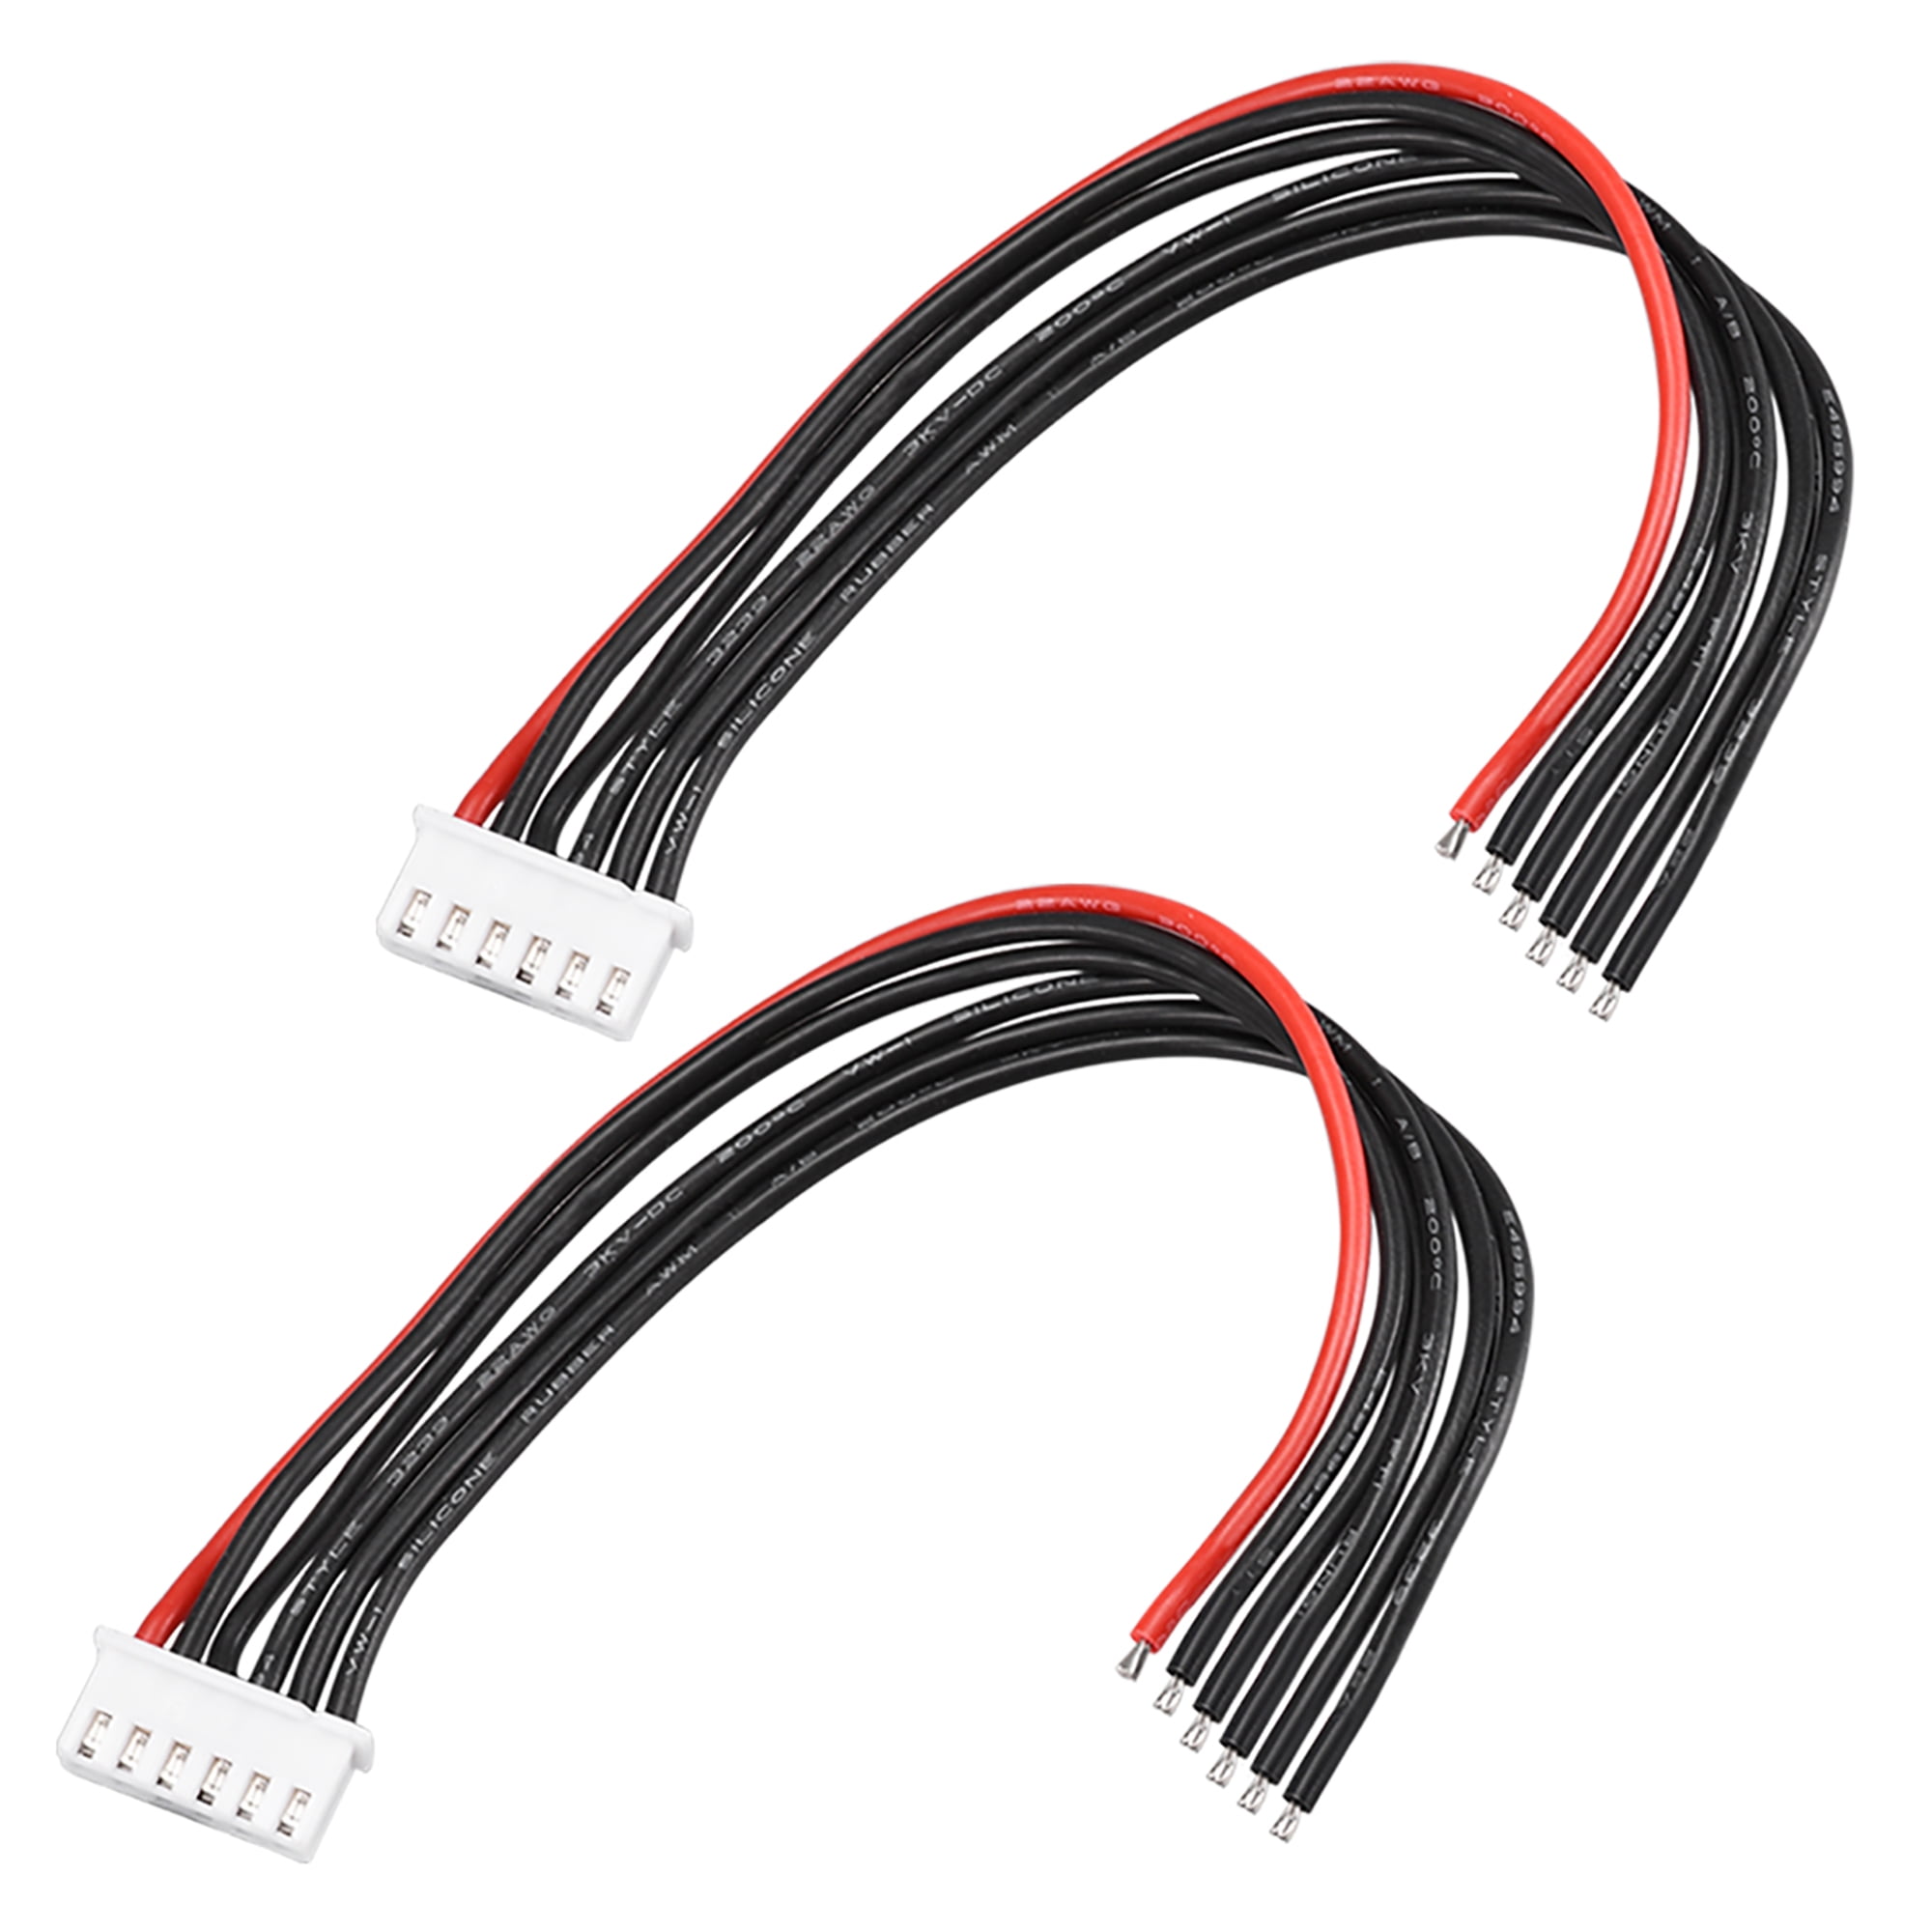 FLY RC 10pcs 22.2V 7 Pin Male Plug 6S LiPo Battery Balance Charger Cable Lead Wire Connector 